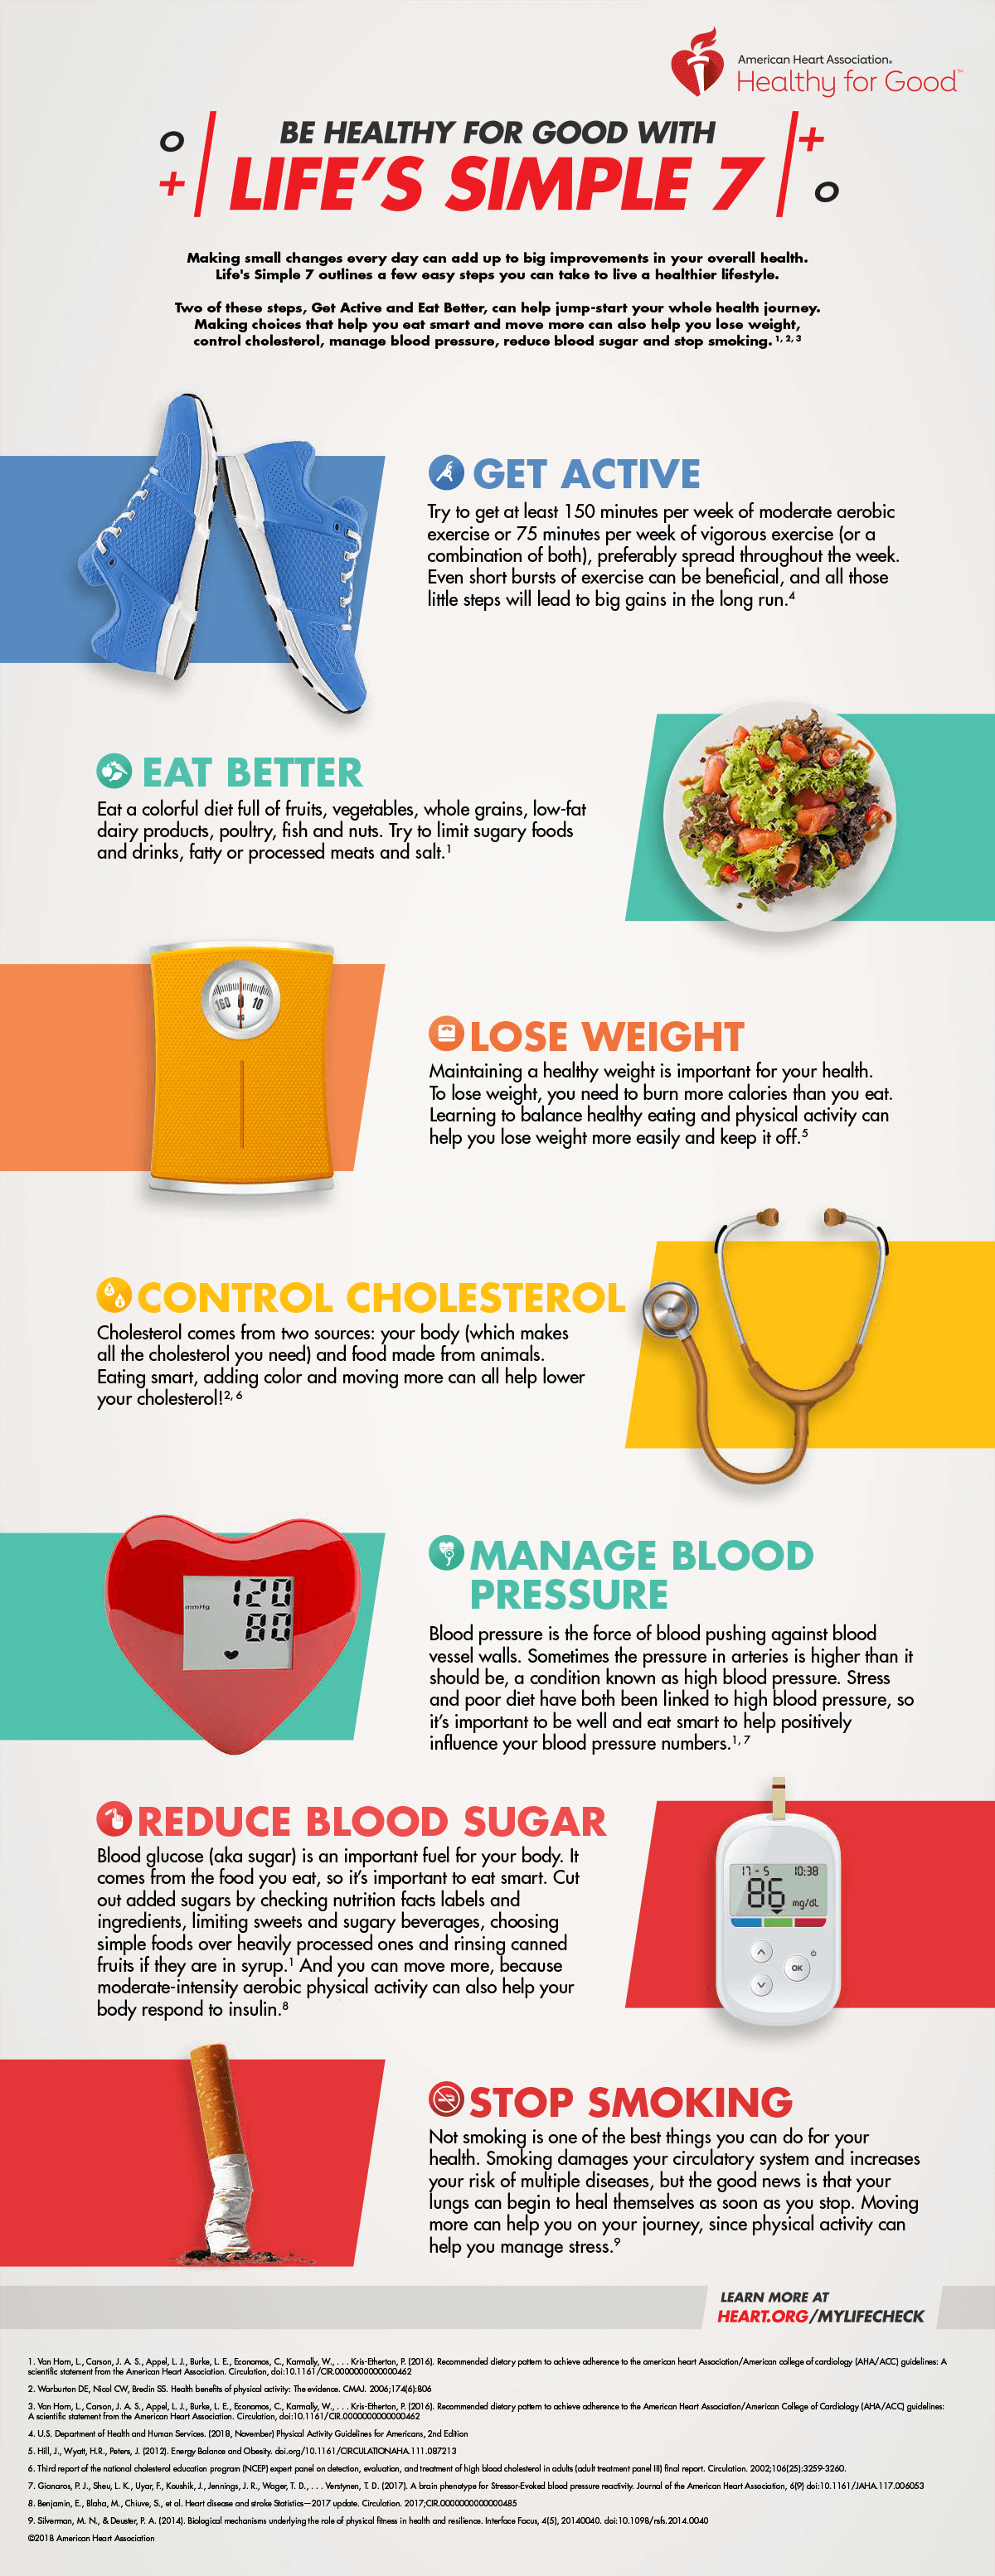 Life's Simple 7 infographic